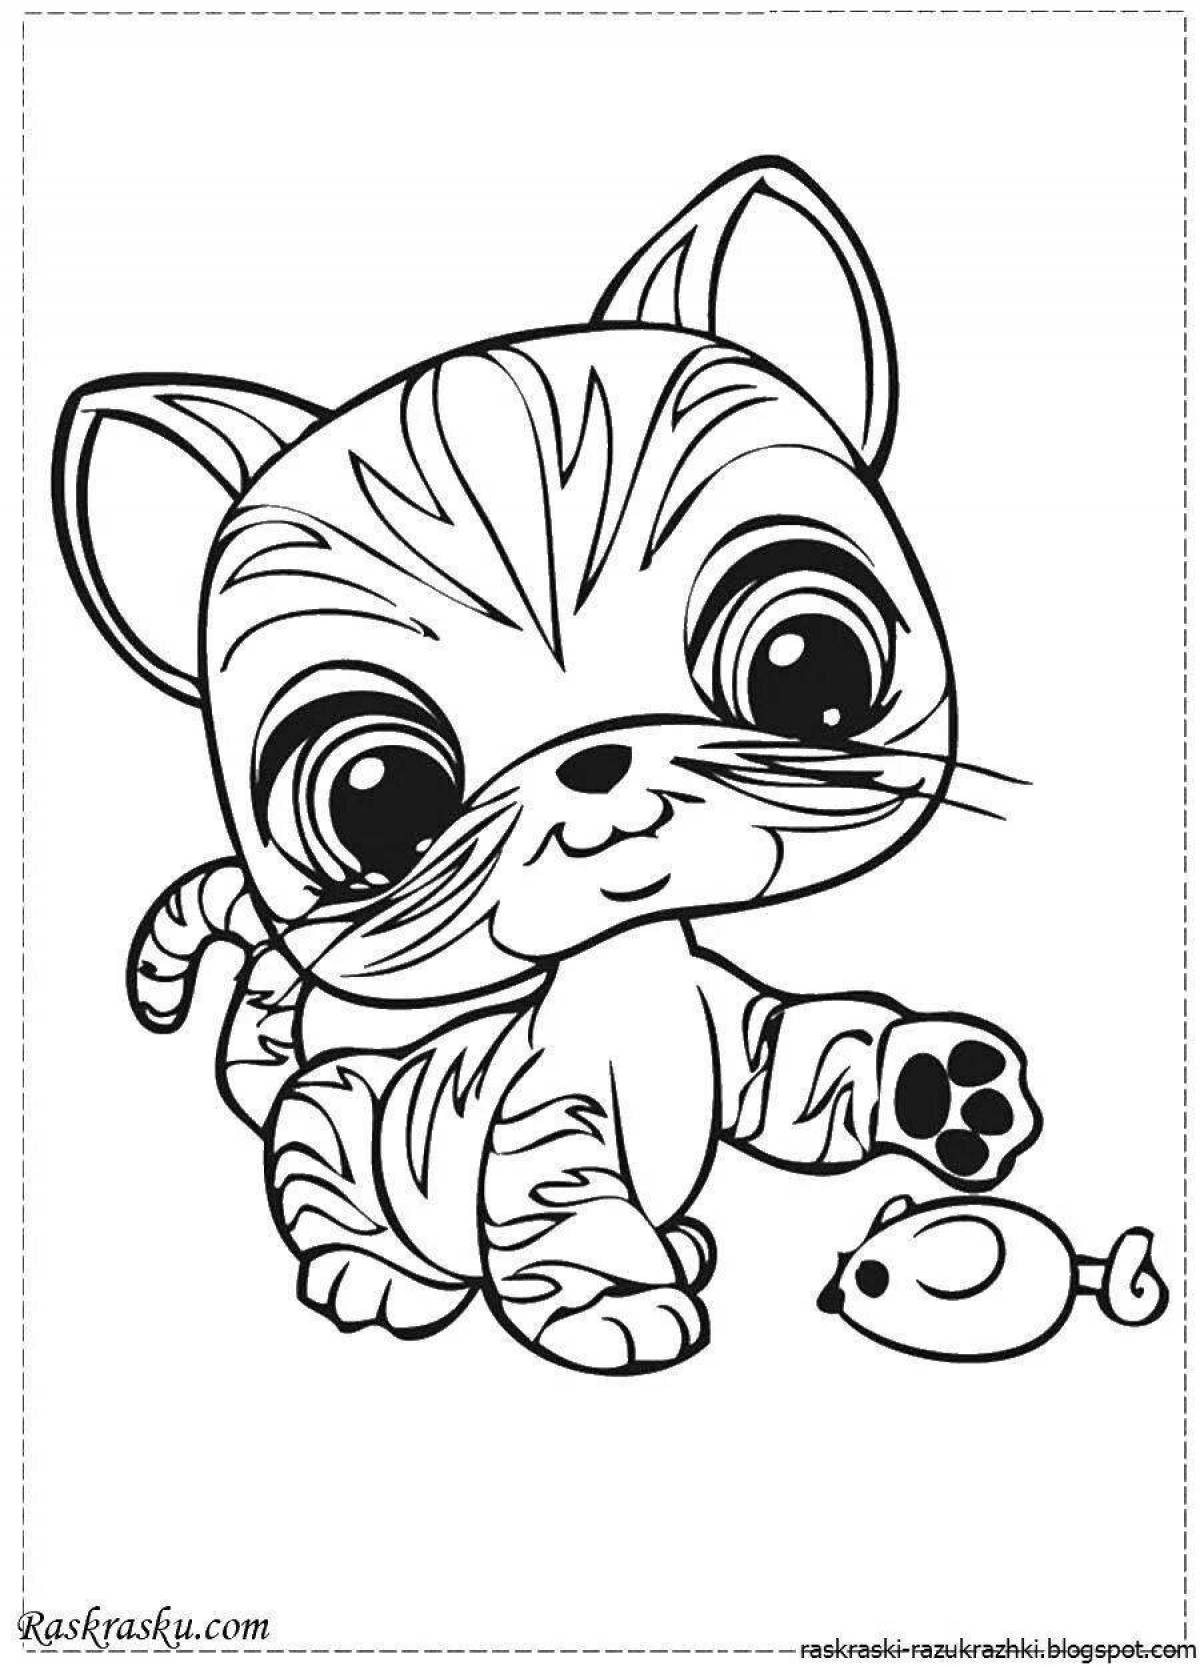 Cute cute cats coloring book for girls